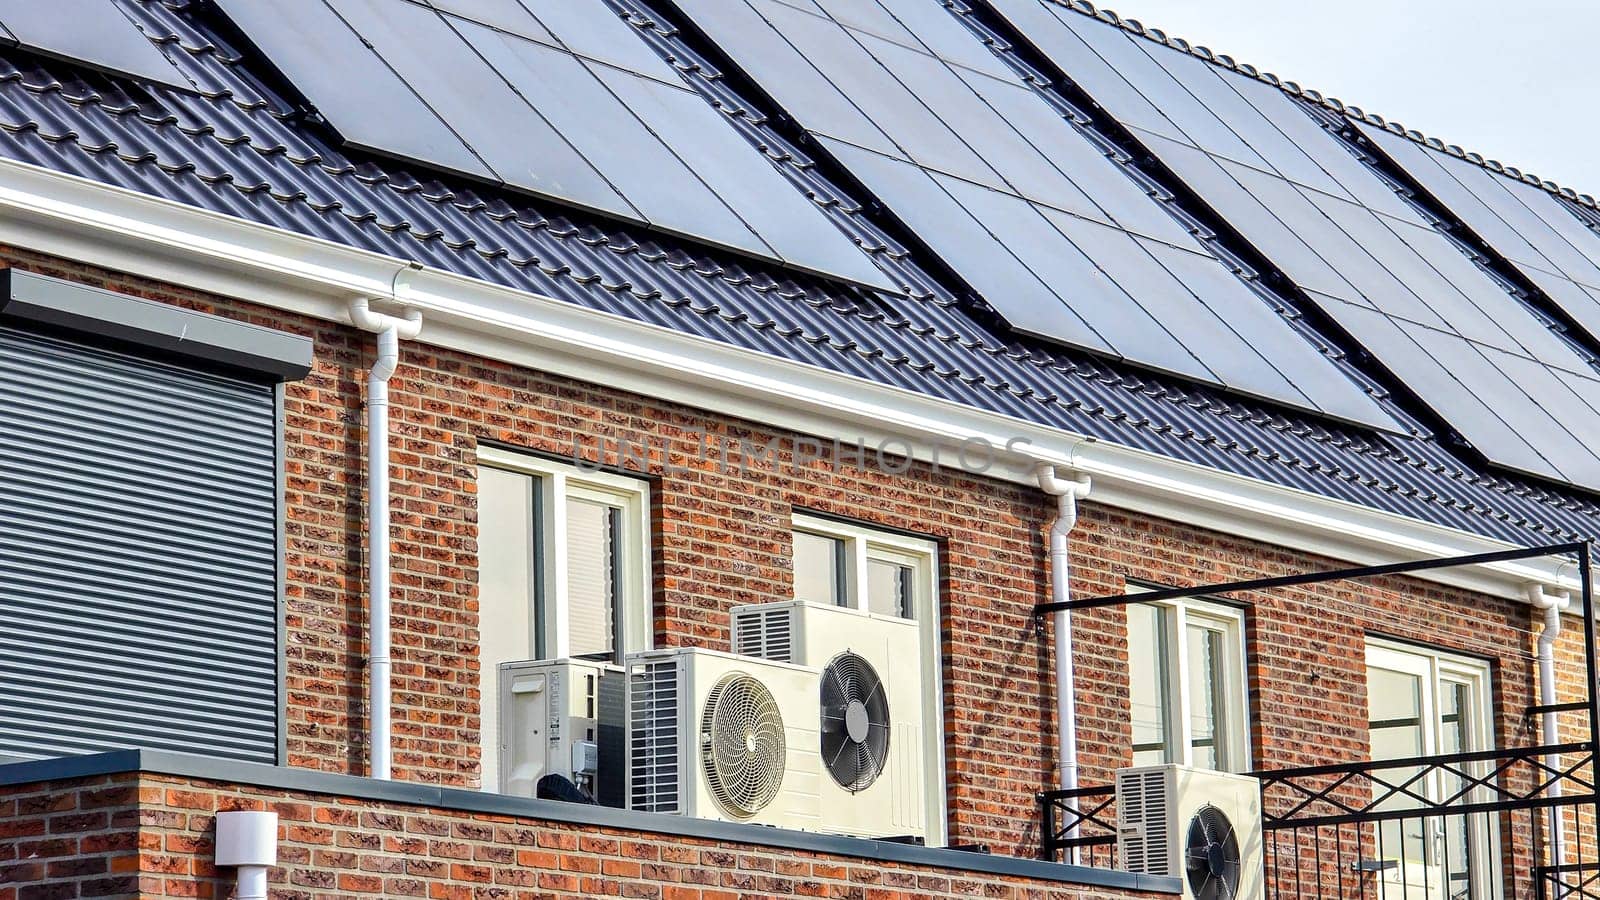 air source heat pump unit installed outdoors at a modern home with solar panels in the Netherlands by fokkebok